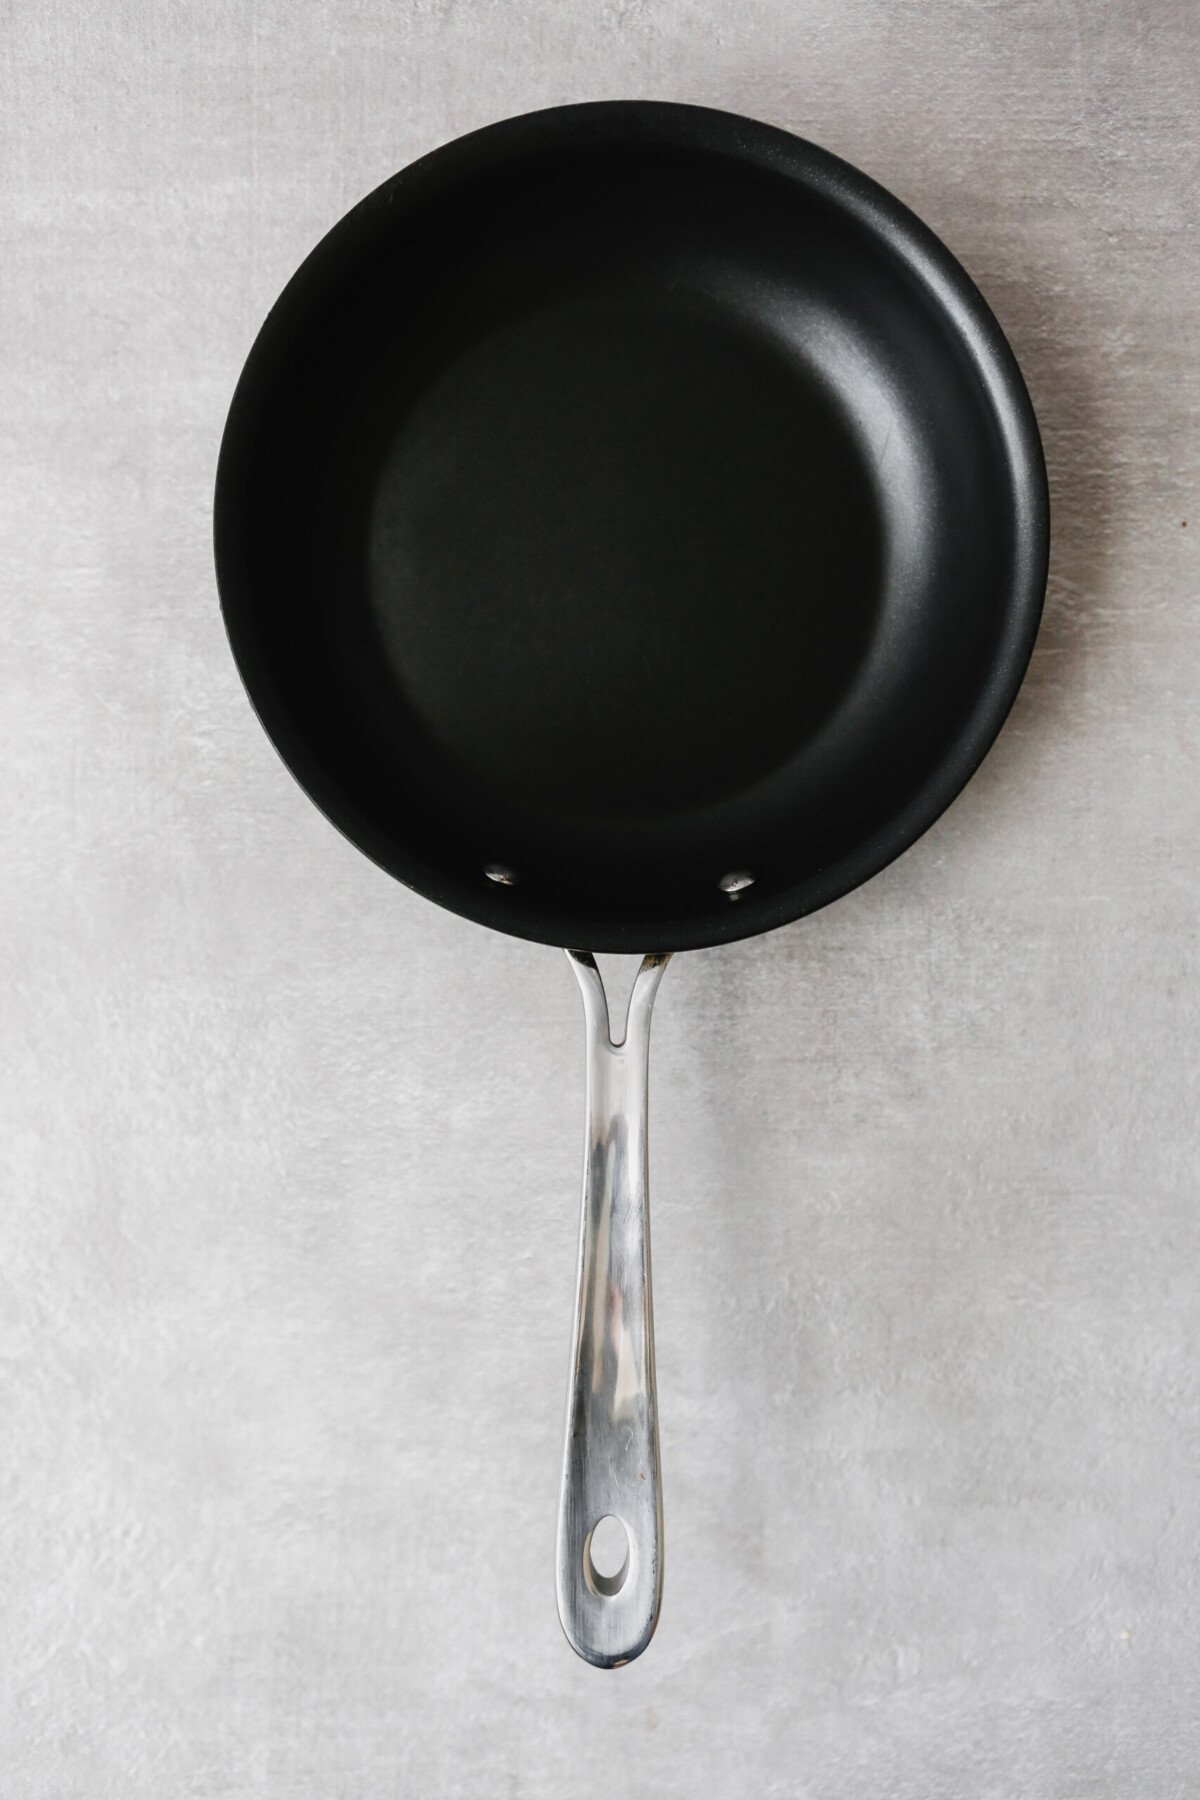 Photograph of a nonstick All-Clad skillet on a gray table